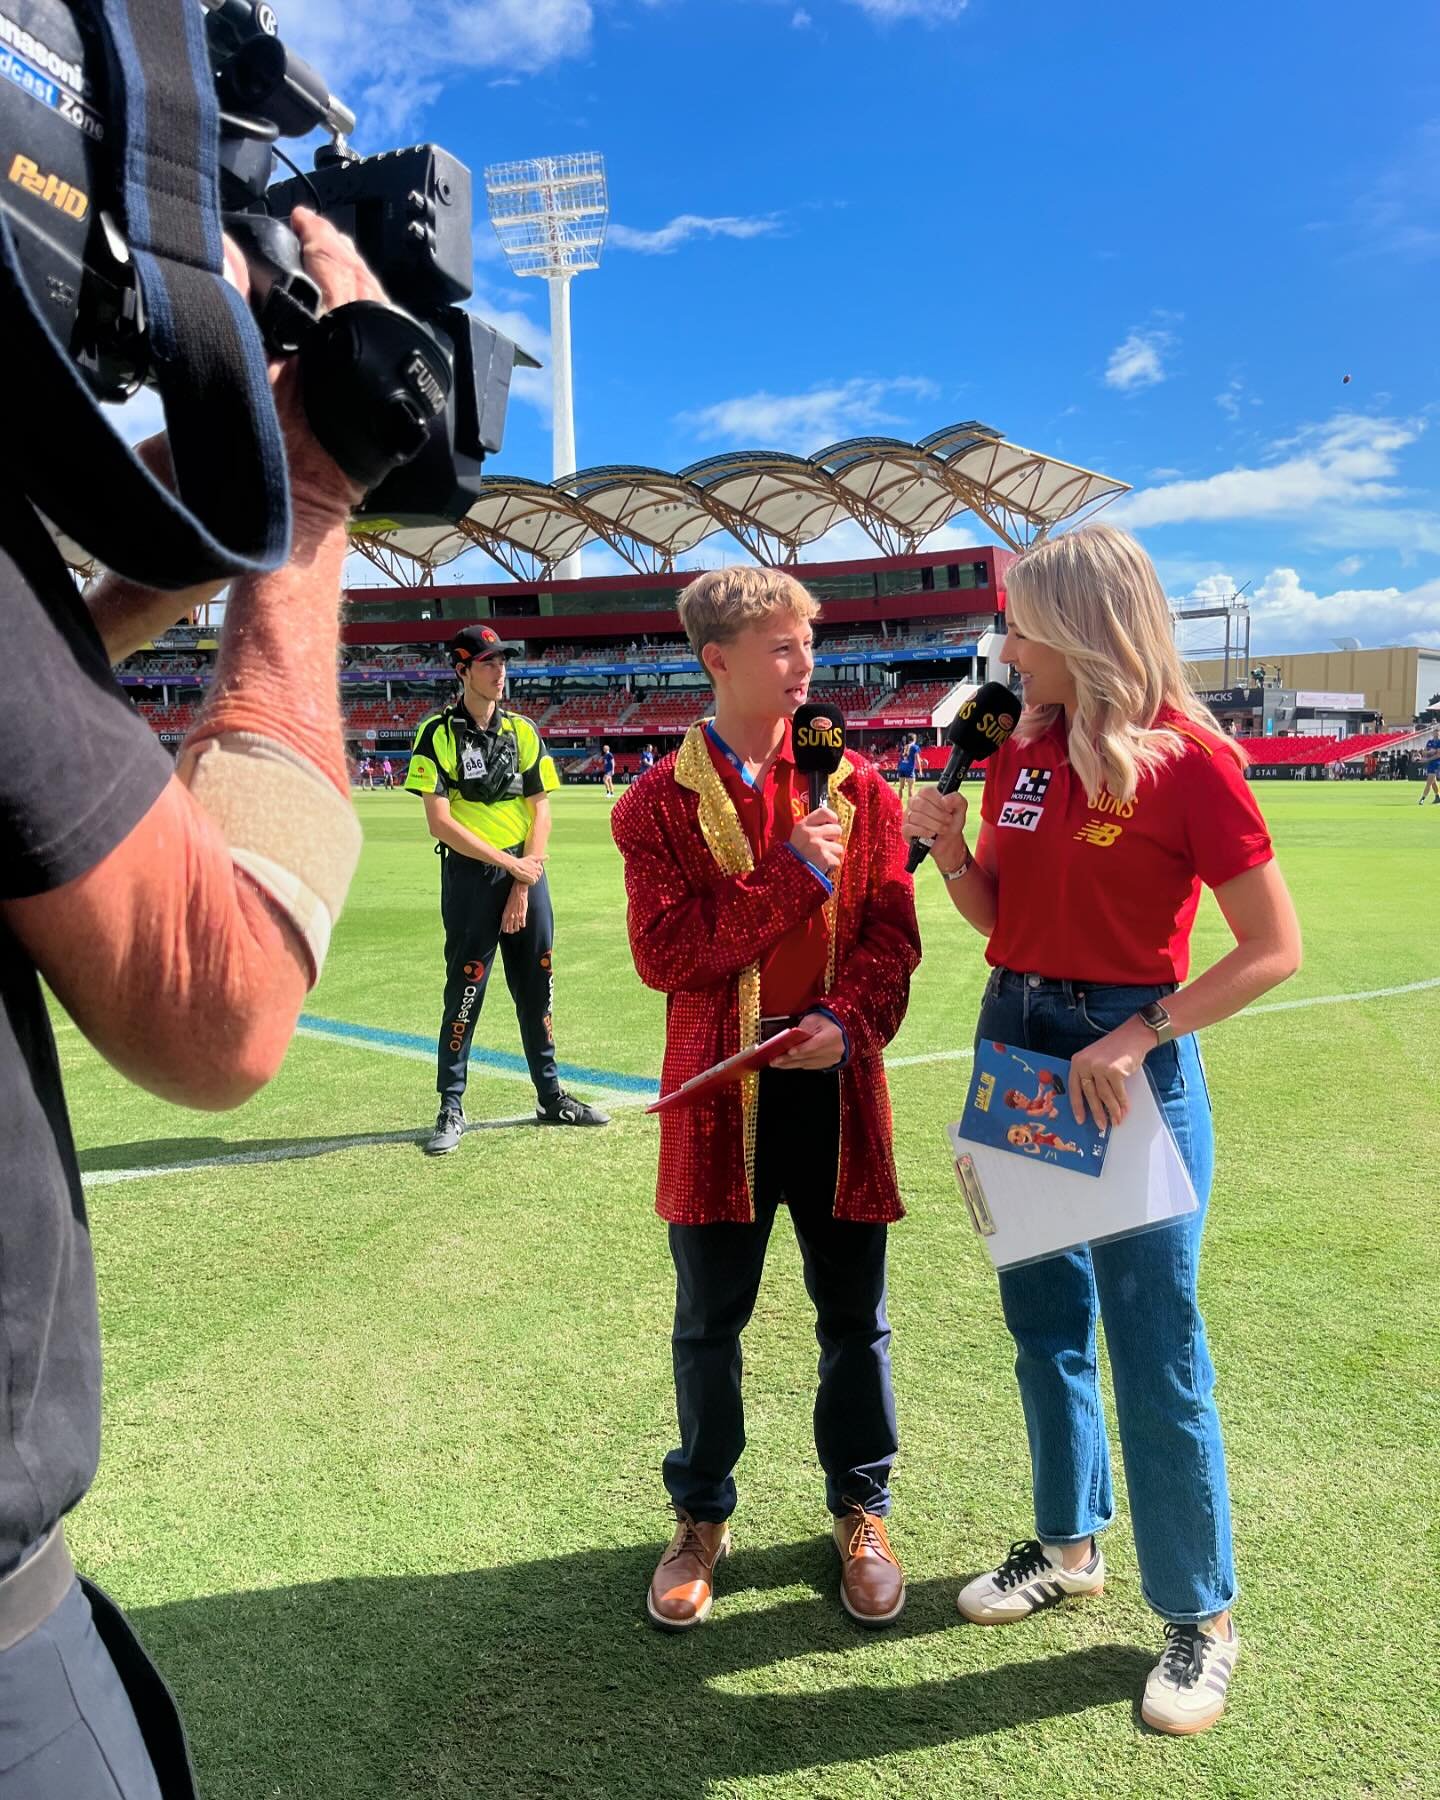 Zero filter needed for ☀️DAY!

Same game, different stadium! Great to spend the afternoon on camera for the @gcsuns!

Footy &amp; live crosses - two of my favourite things!

#host #presenter #work #mc #afl #2024 #anzacround